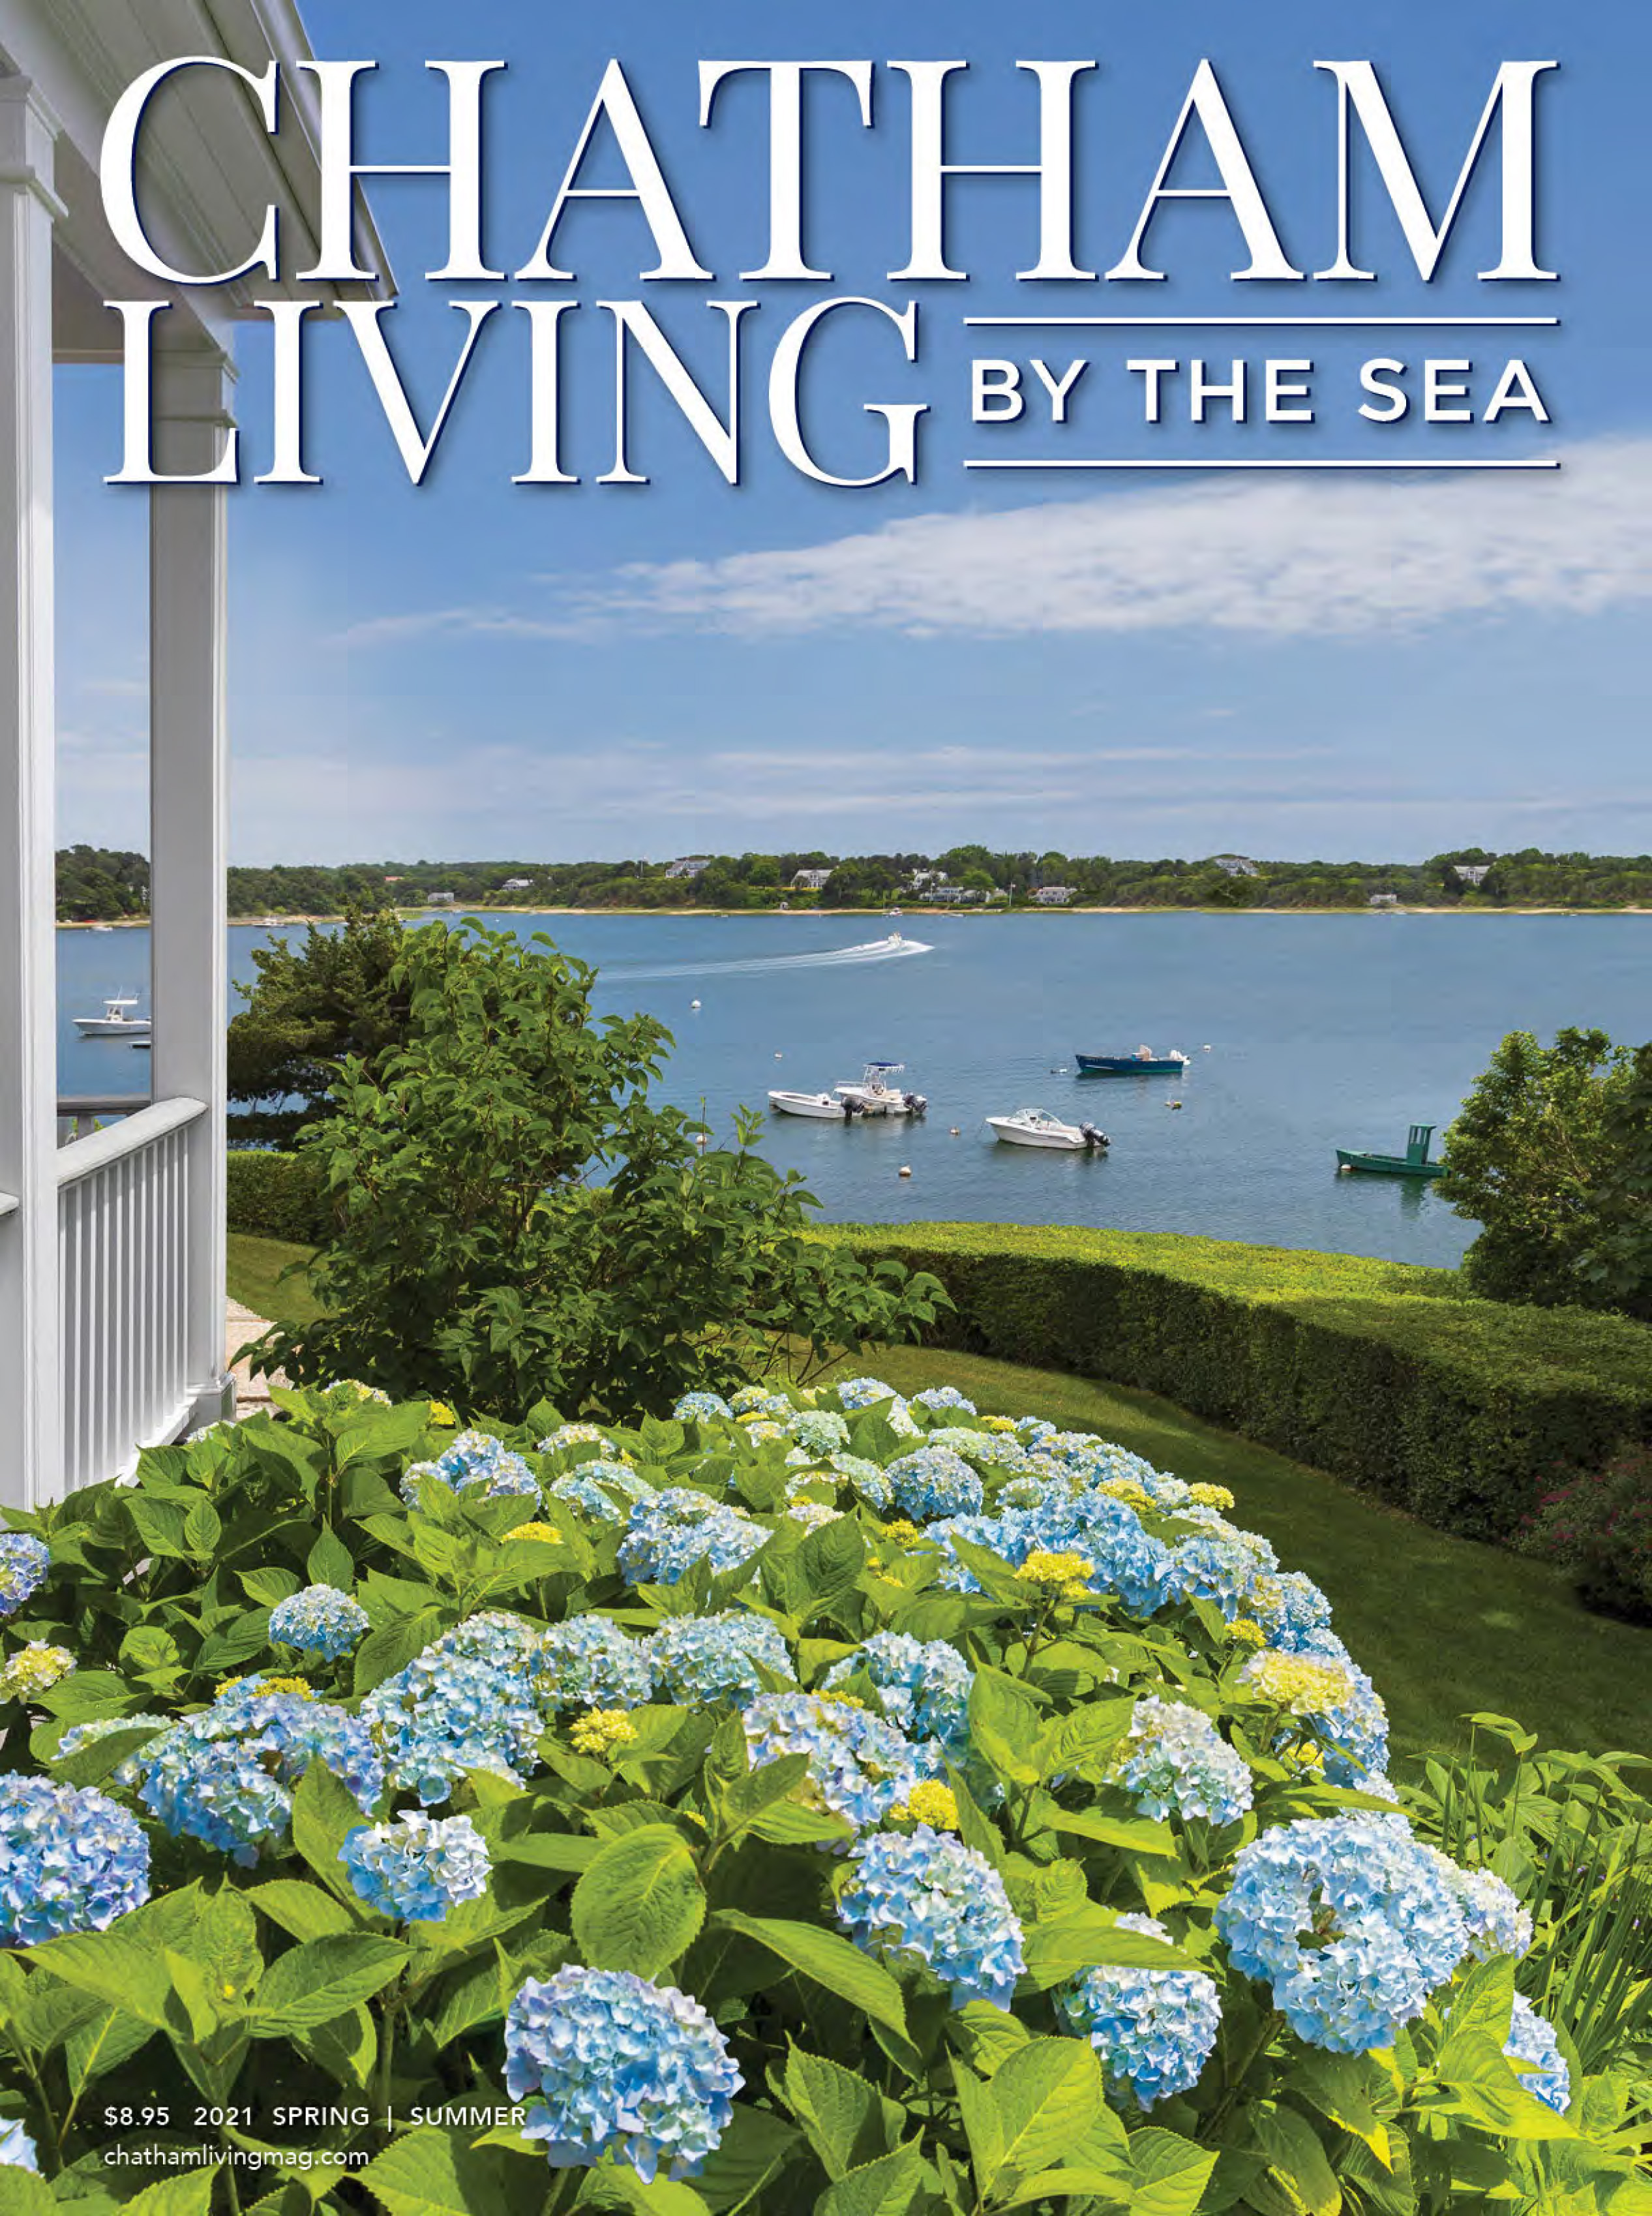 chatham living by the sea magazine cover